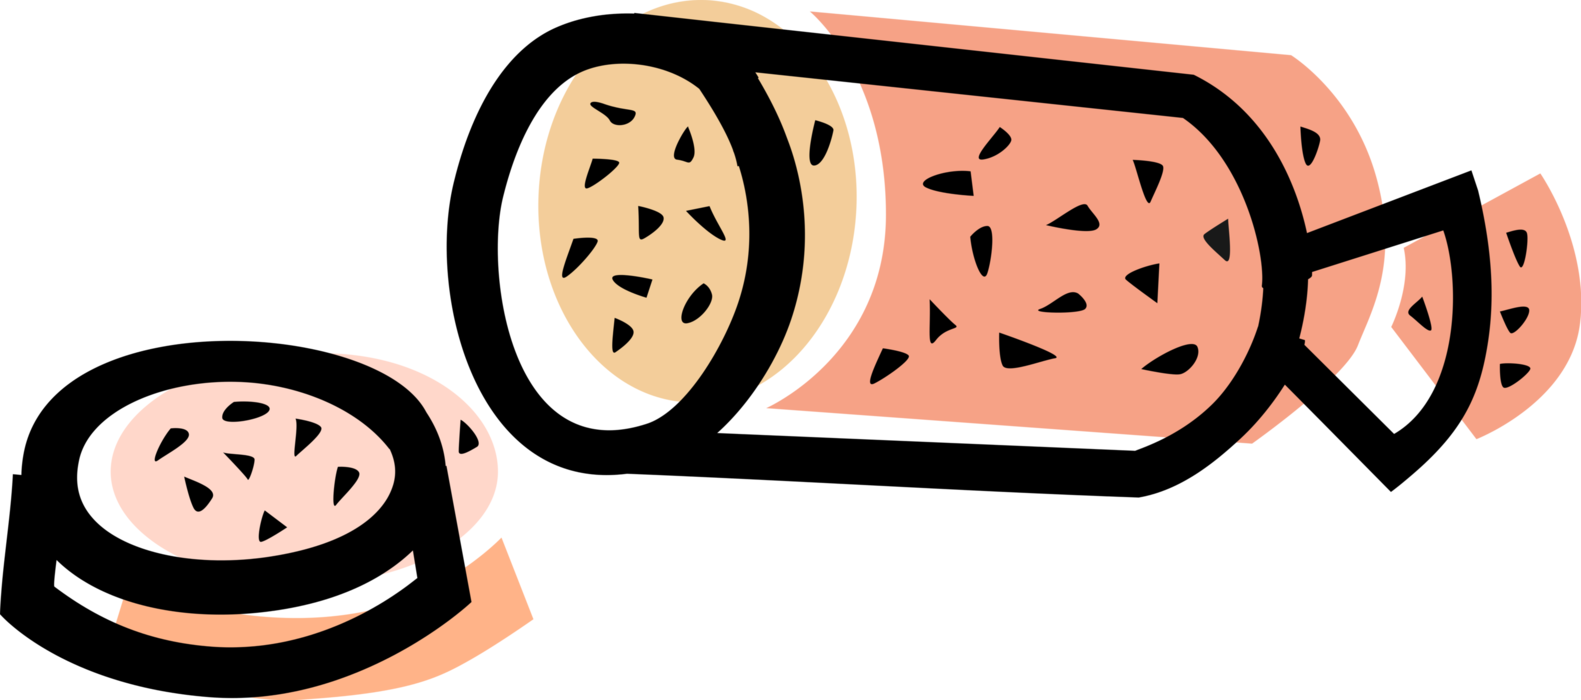 Vector Illustration of Salami Cured Sausage Fermented and Air-Dried Meat